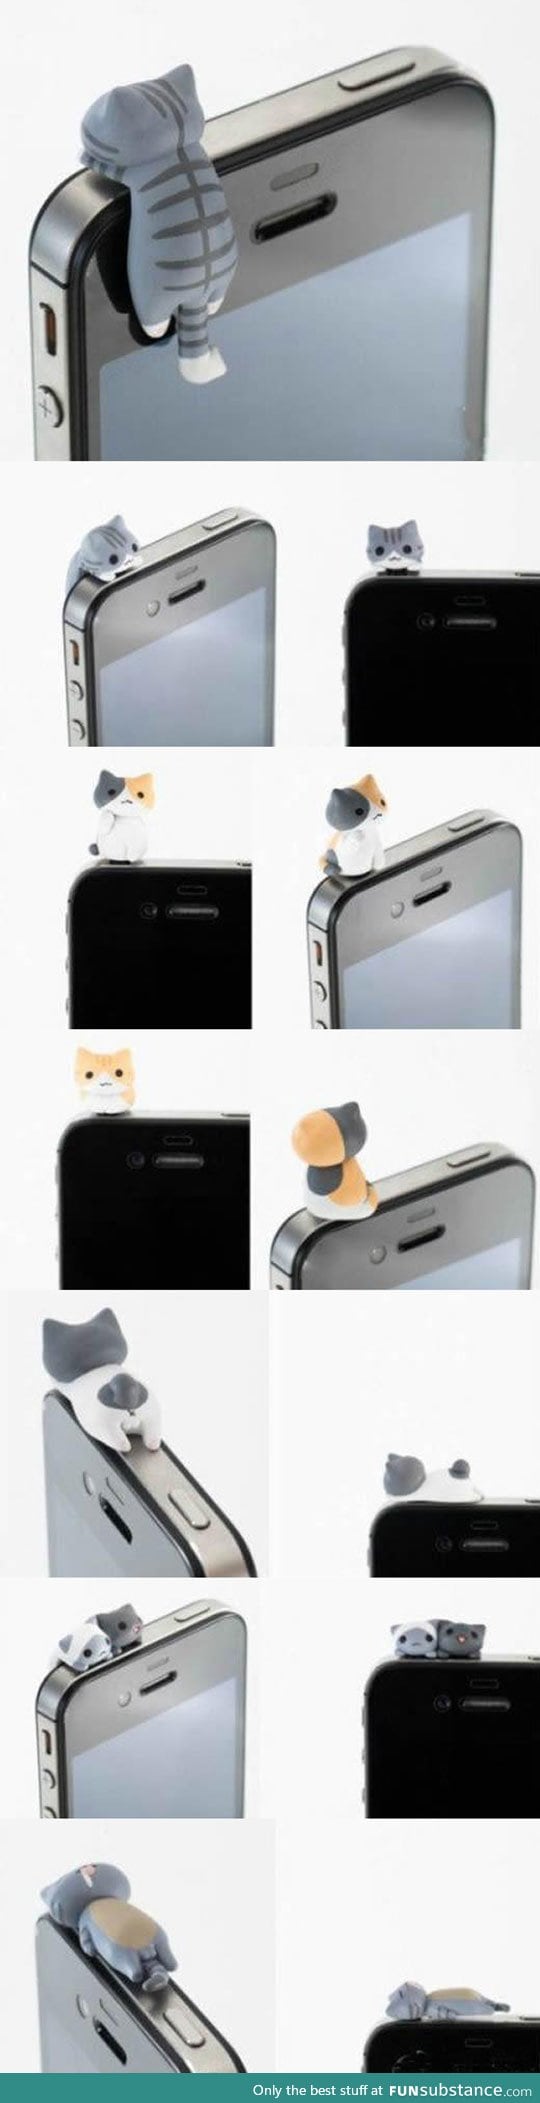 I need this for my phone, because of reasons